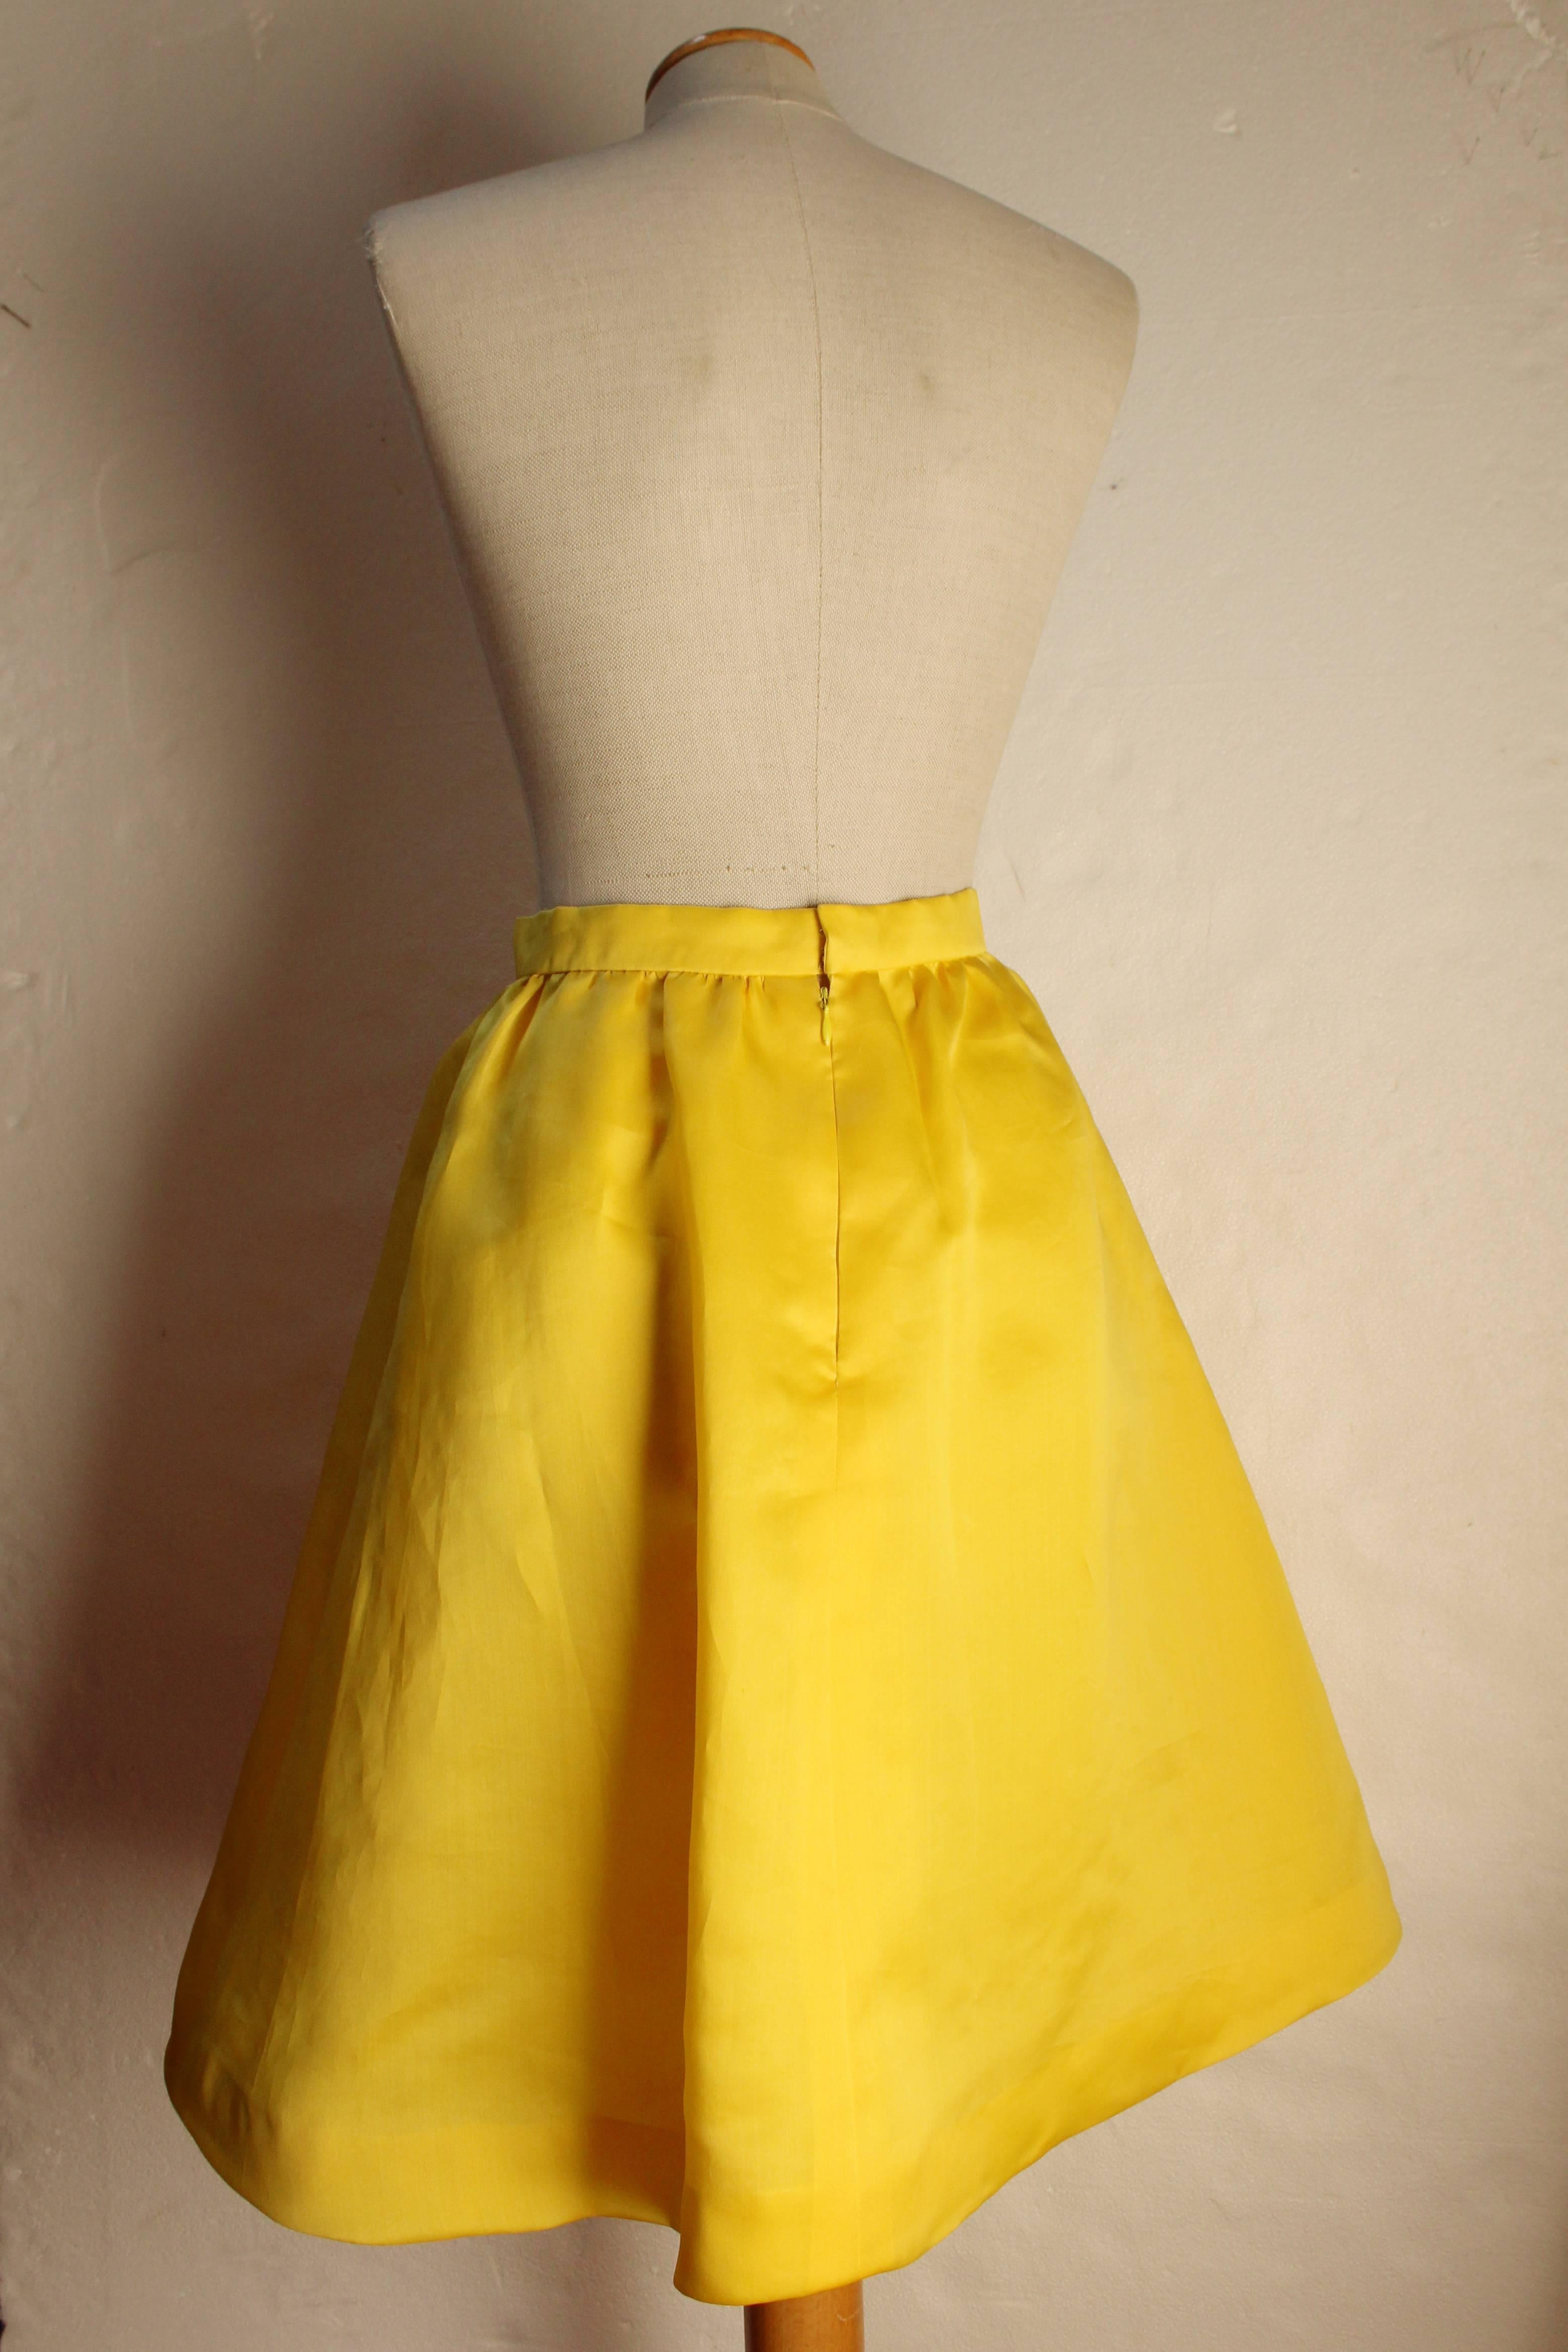 The mid-length Balenciaga Le Dix yellow skirt is 100% silk and fully lined in acetate.
This skirt with its 50s flavour dates back to the 1980s.
Size 42 FR.